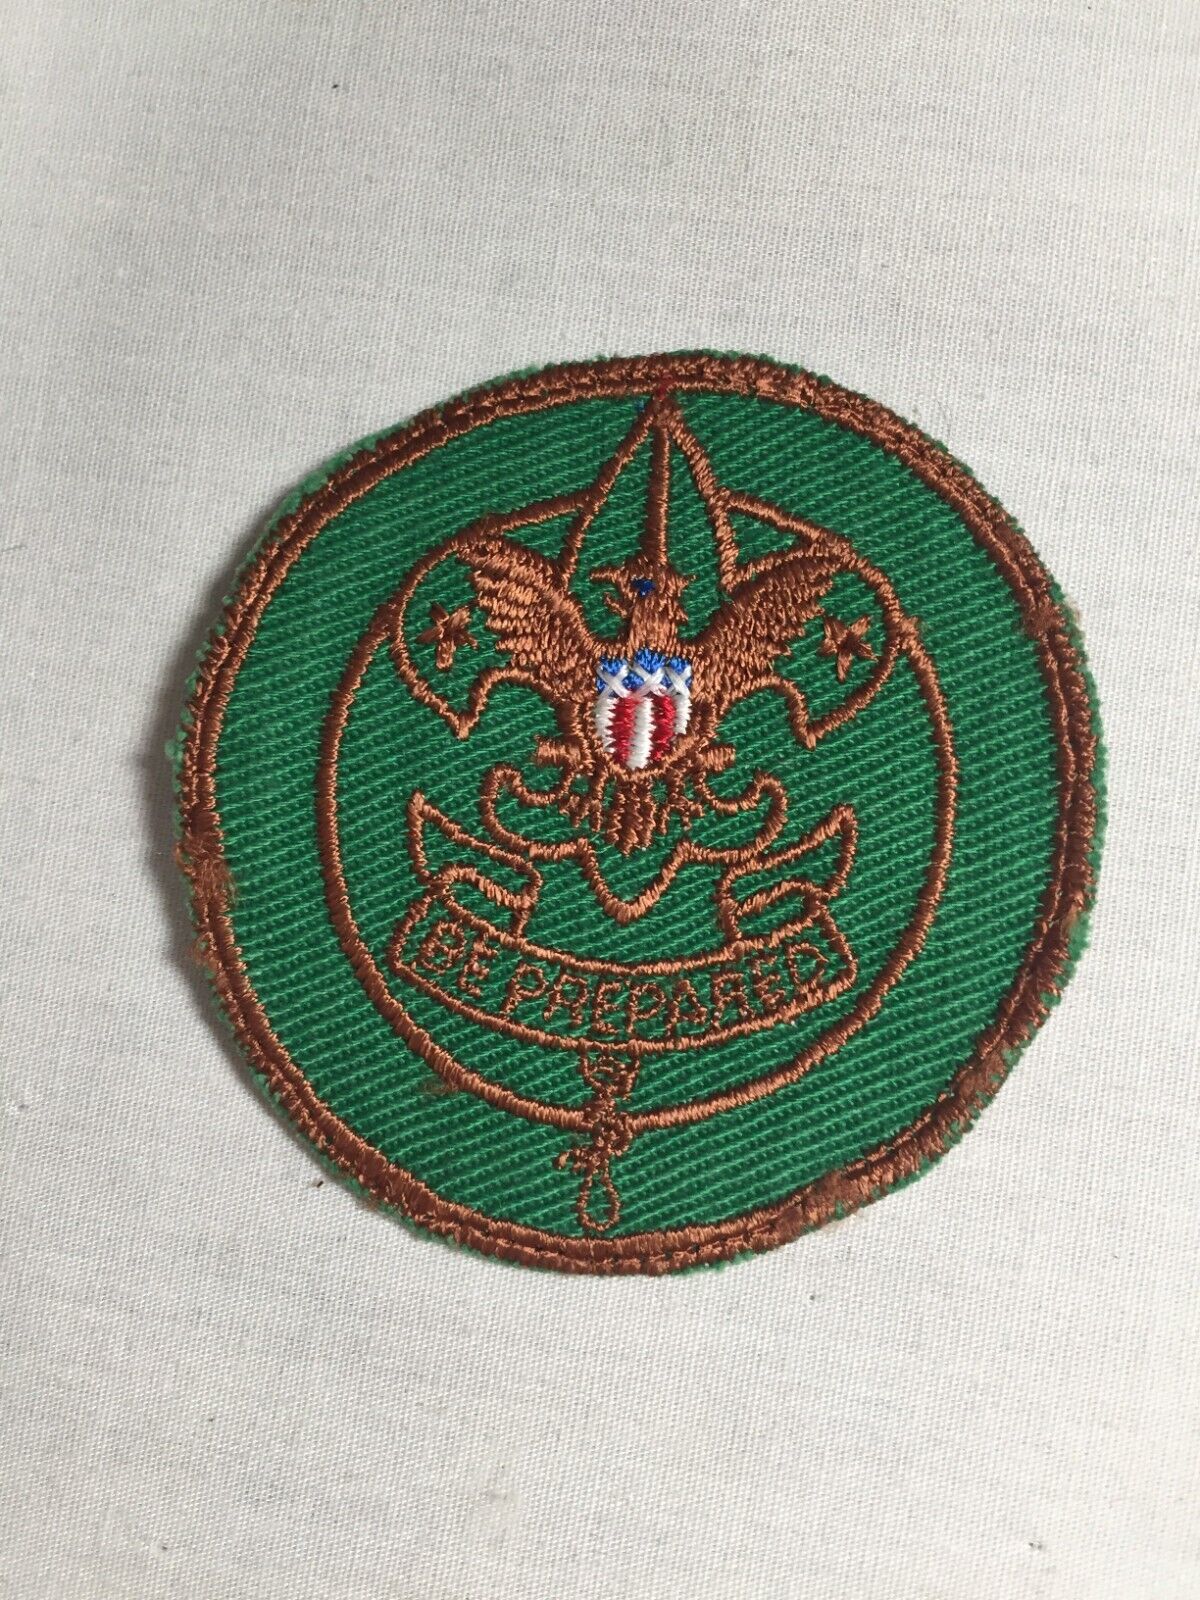 1948 - 51 Junior Assistant Scoutmaster used gauze back BSA Position Patch